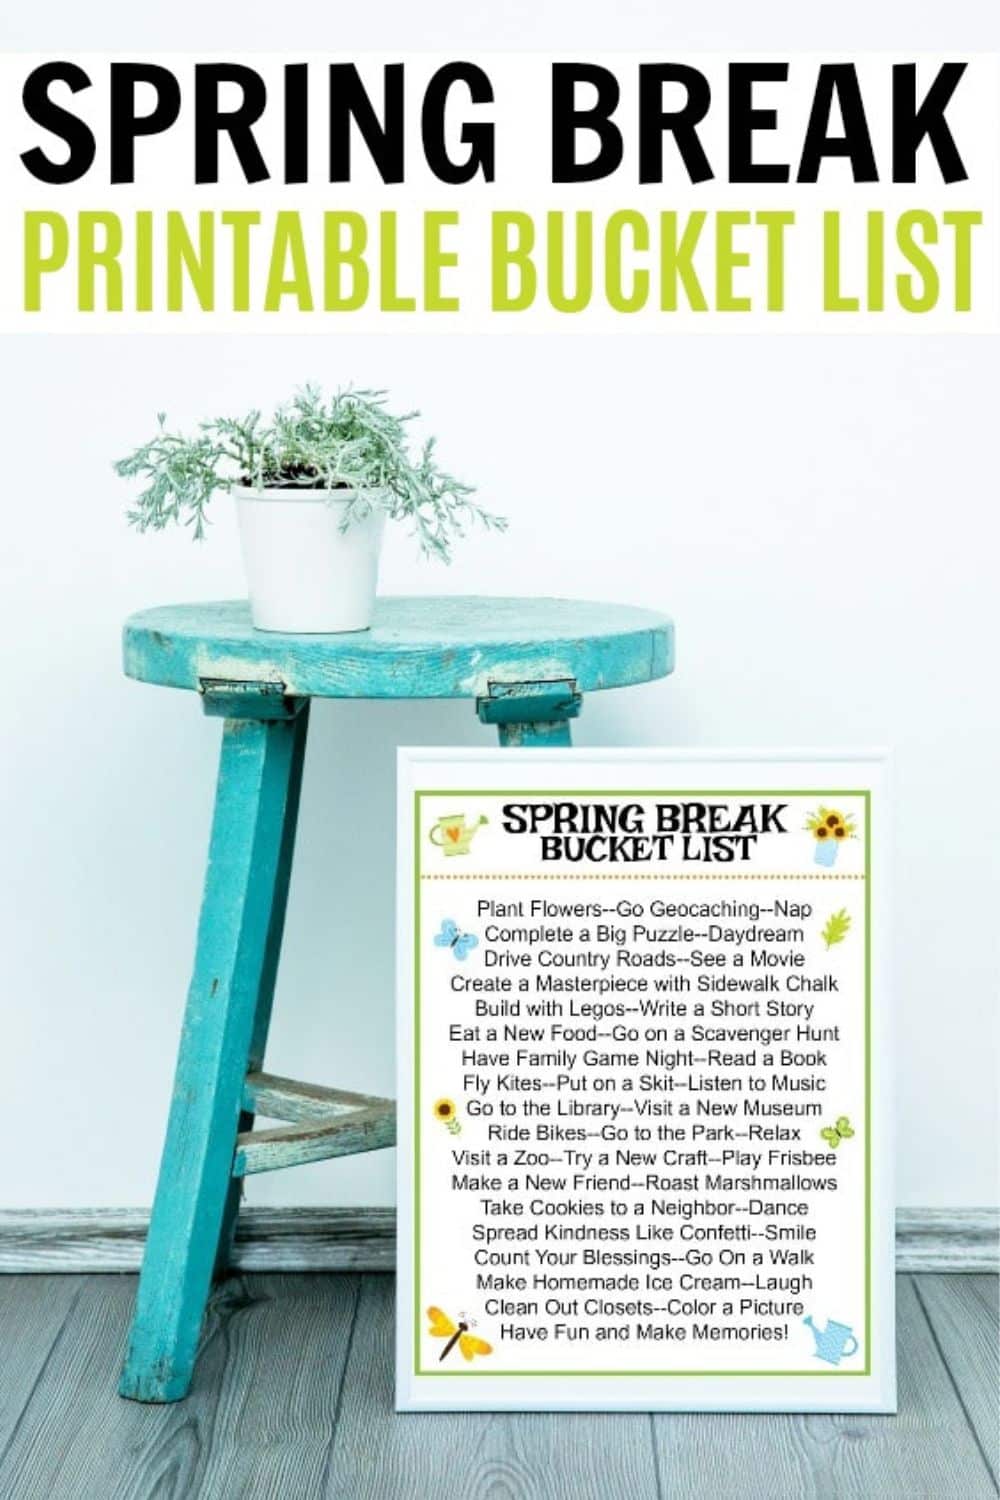 A "Spring Break Bucket List" poster displayed on a blue wooden table next to a potted plant.